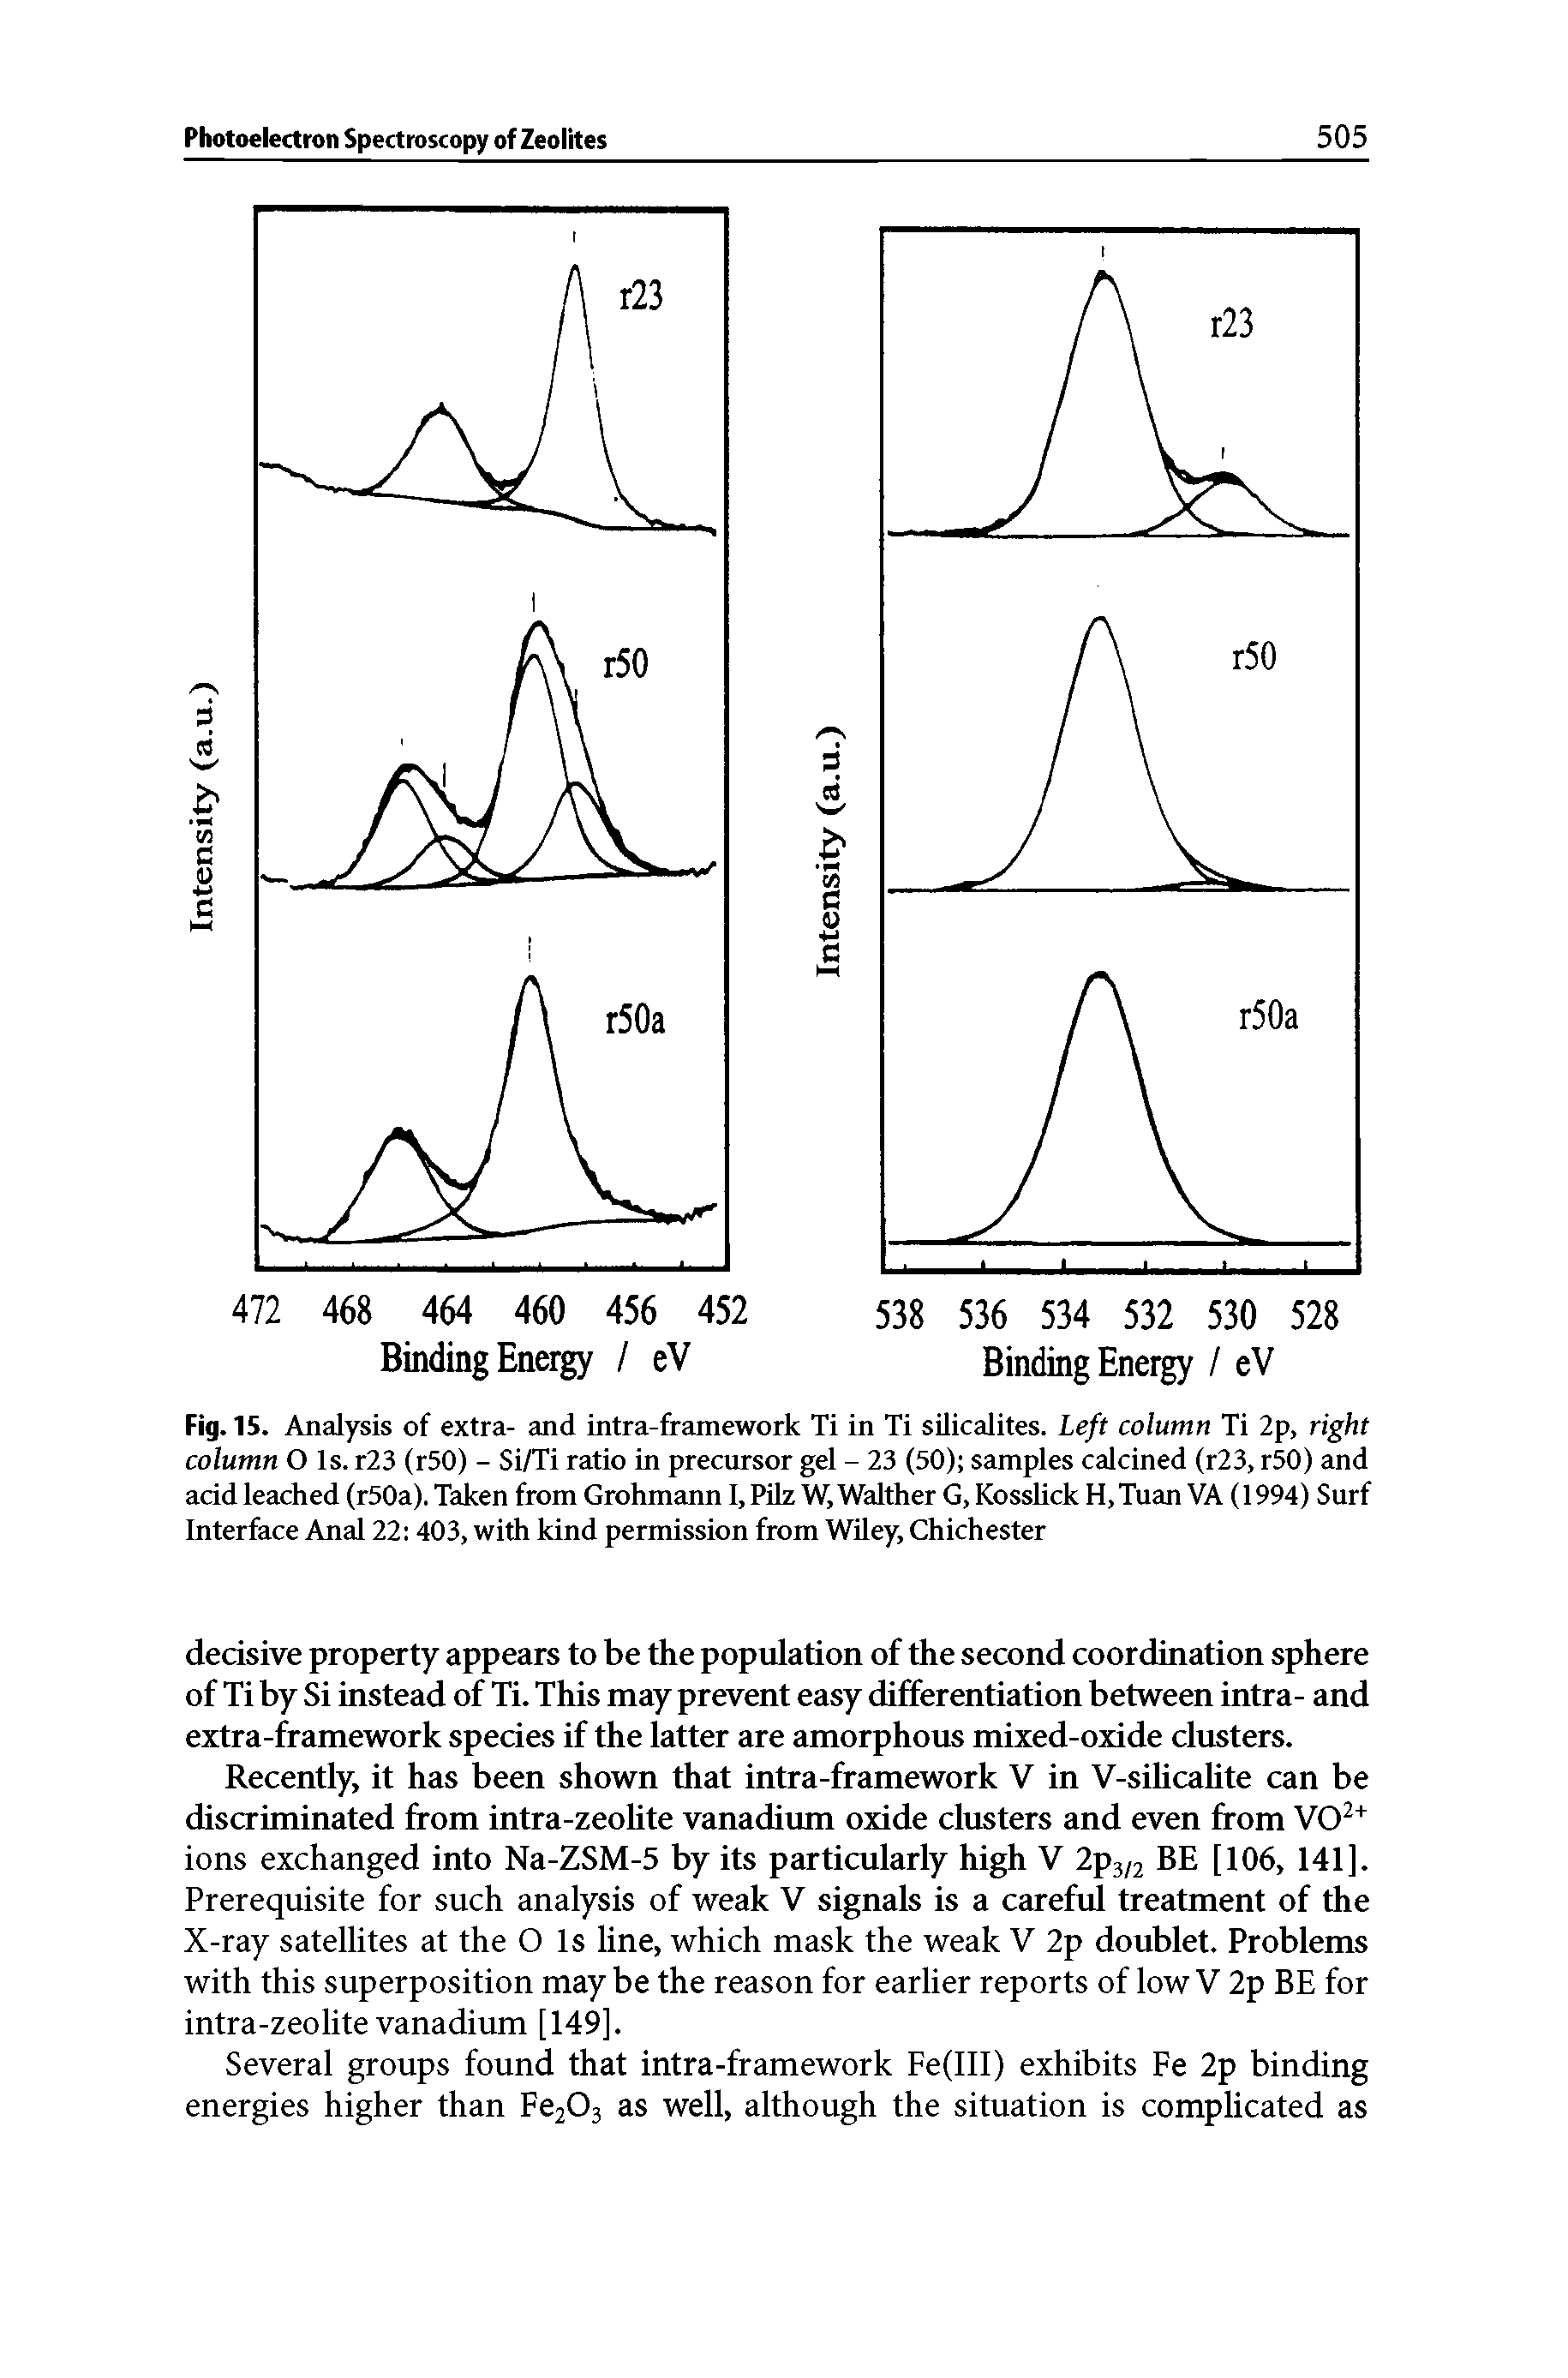 Fig. 15. Analysis of extra- and intra-framework Ti in Ti silicalites. Left column Ti 2p, right column O Is. r23 (r50) - Si/Ti ratio in precursor gel - 23 (50) samples calcined (r23, r50) and acid leached (r50a). Taken from Grohmann I, Pilz W, Walther G, Kosshck H, Tuan VA (1994) Surf Interface Anal 22 403, with kind permission from Wiley, Chichester...